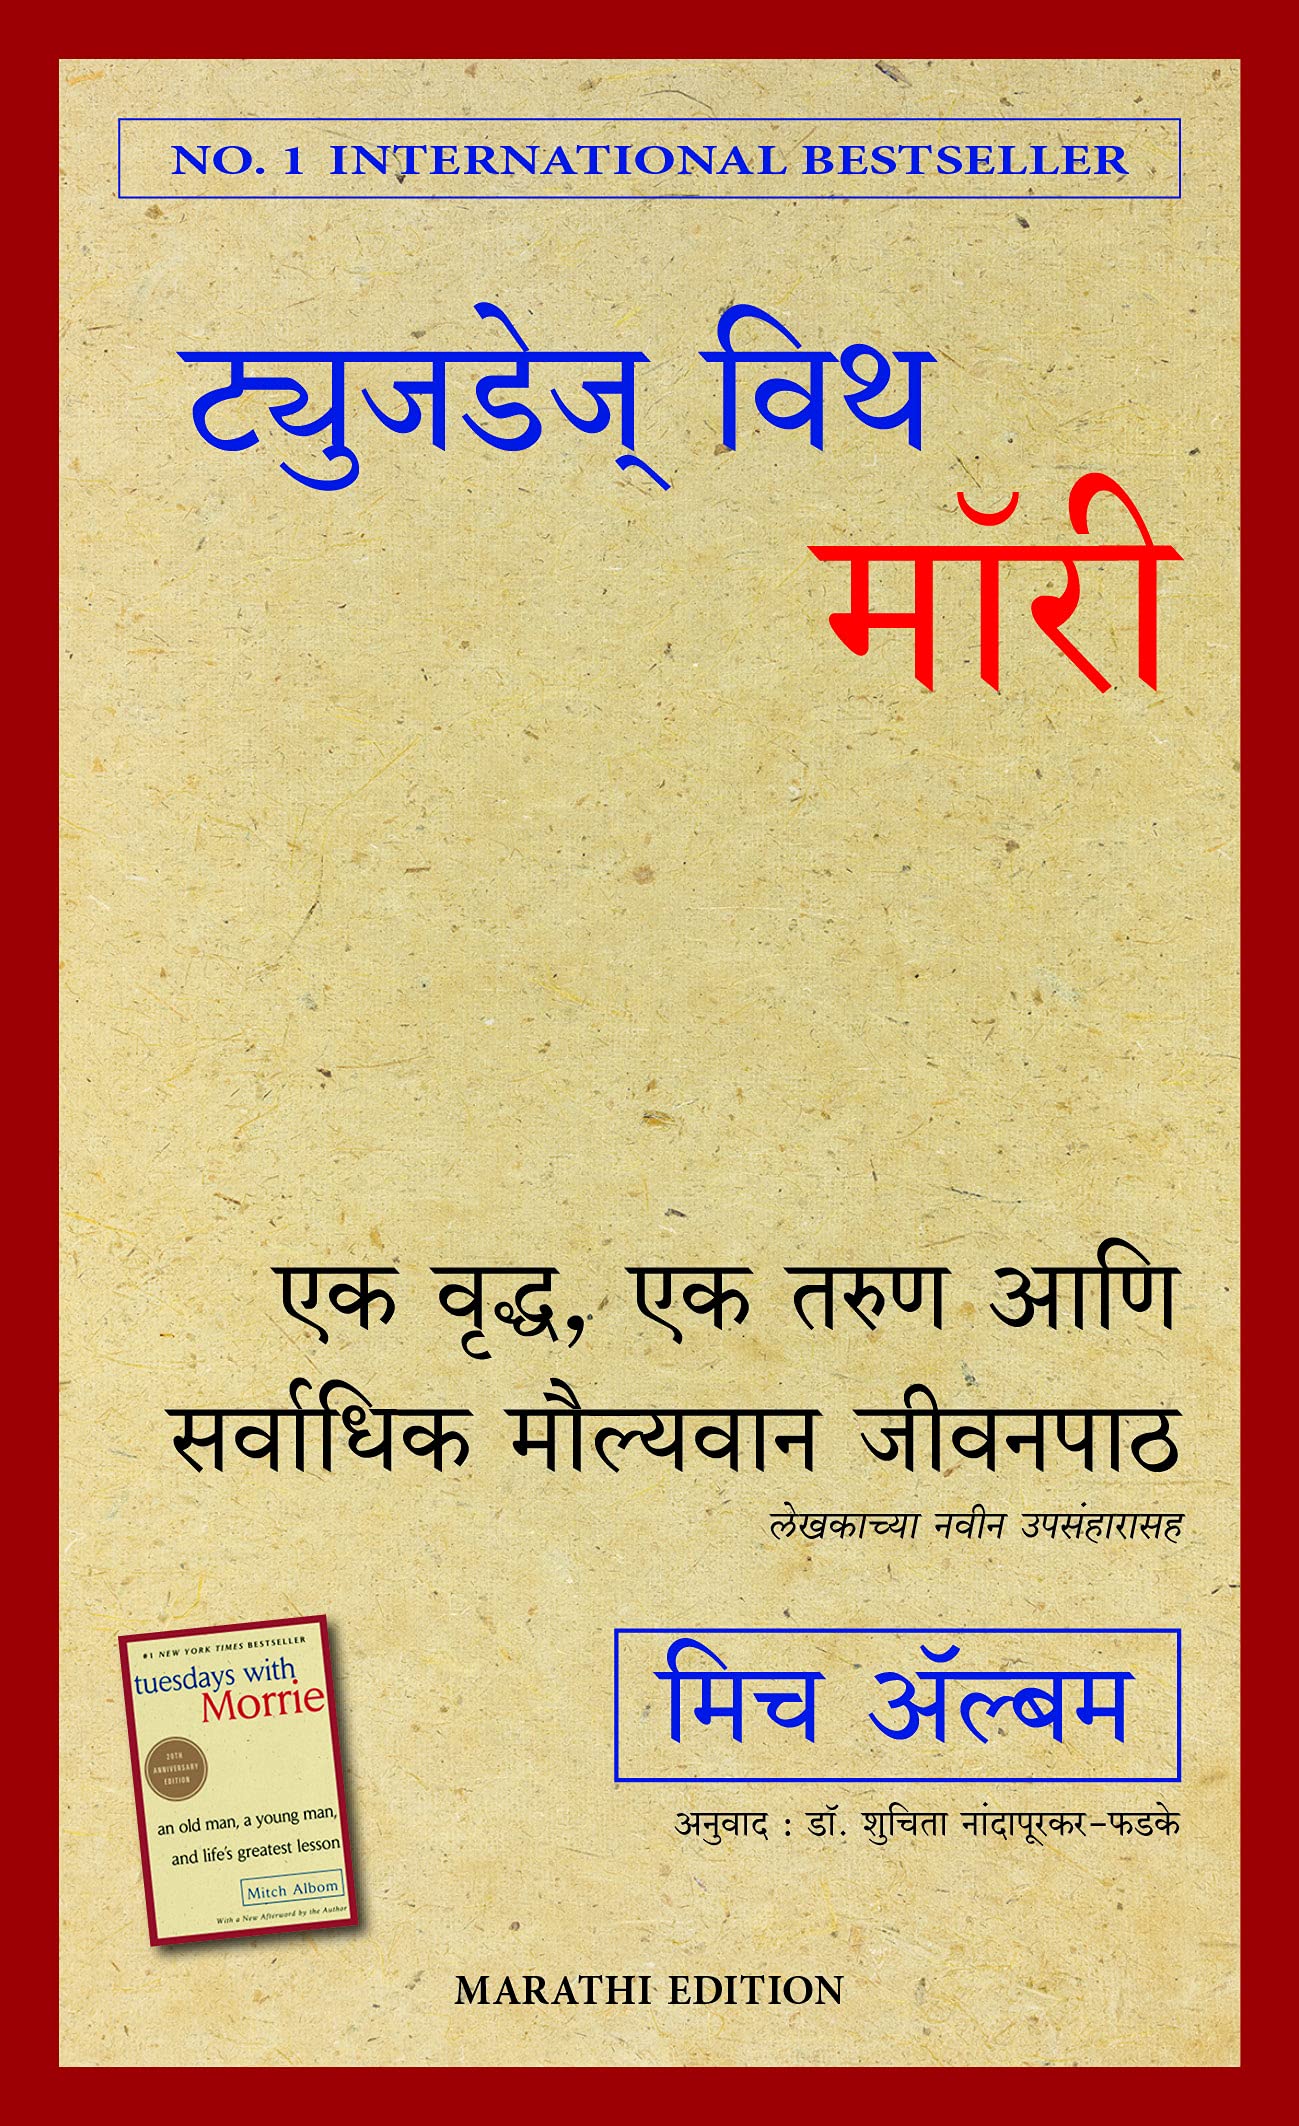 Tuesdays with Morrie: An old man, a young man, and life's greatest lesson (Marathi) (Marathi Edition)